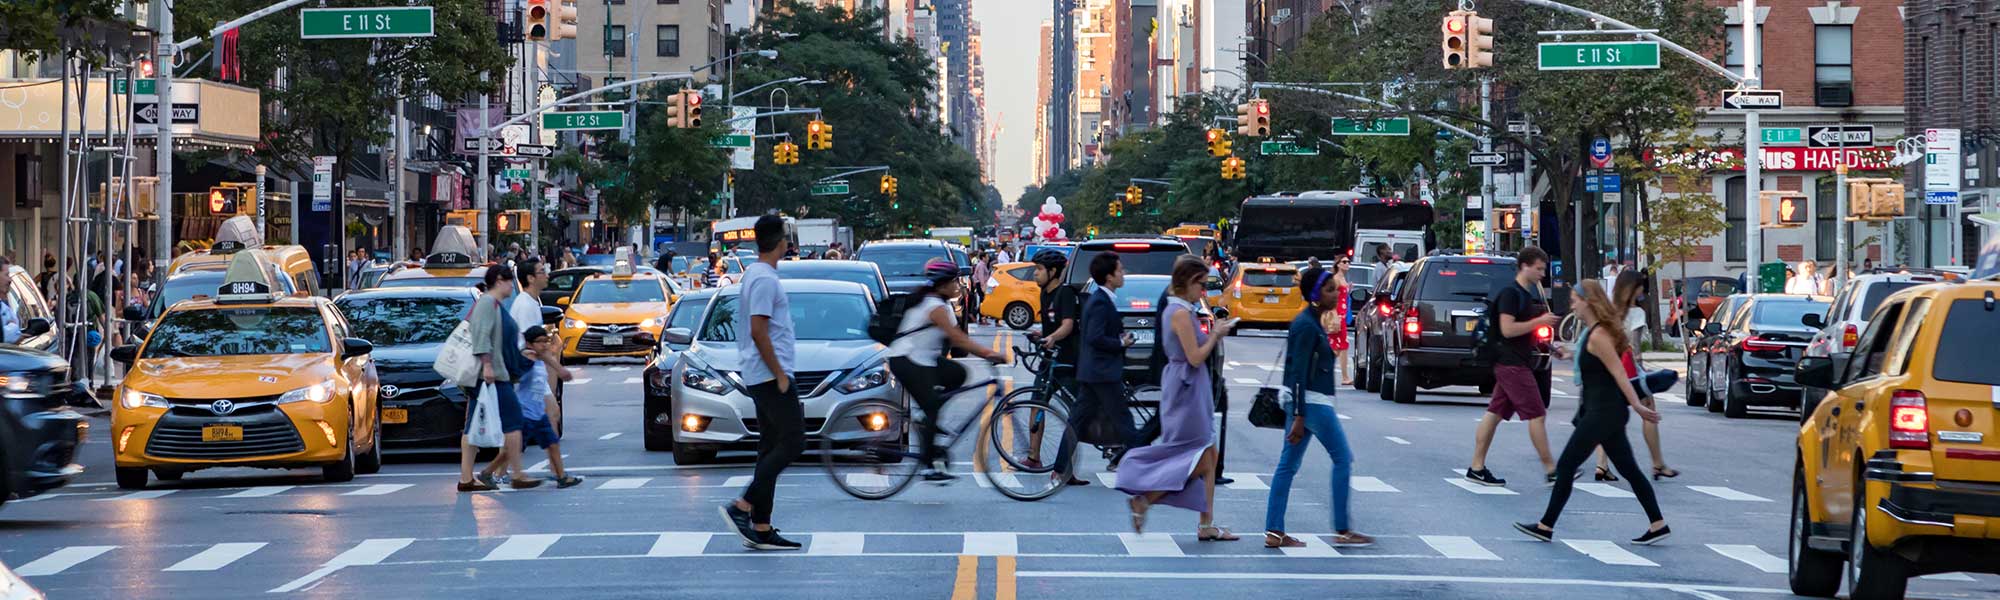 How The Younger Generation Will Save NYC’s Business Districts